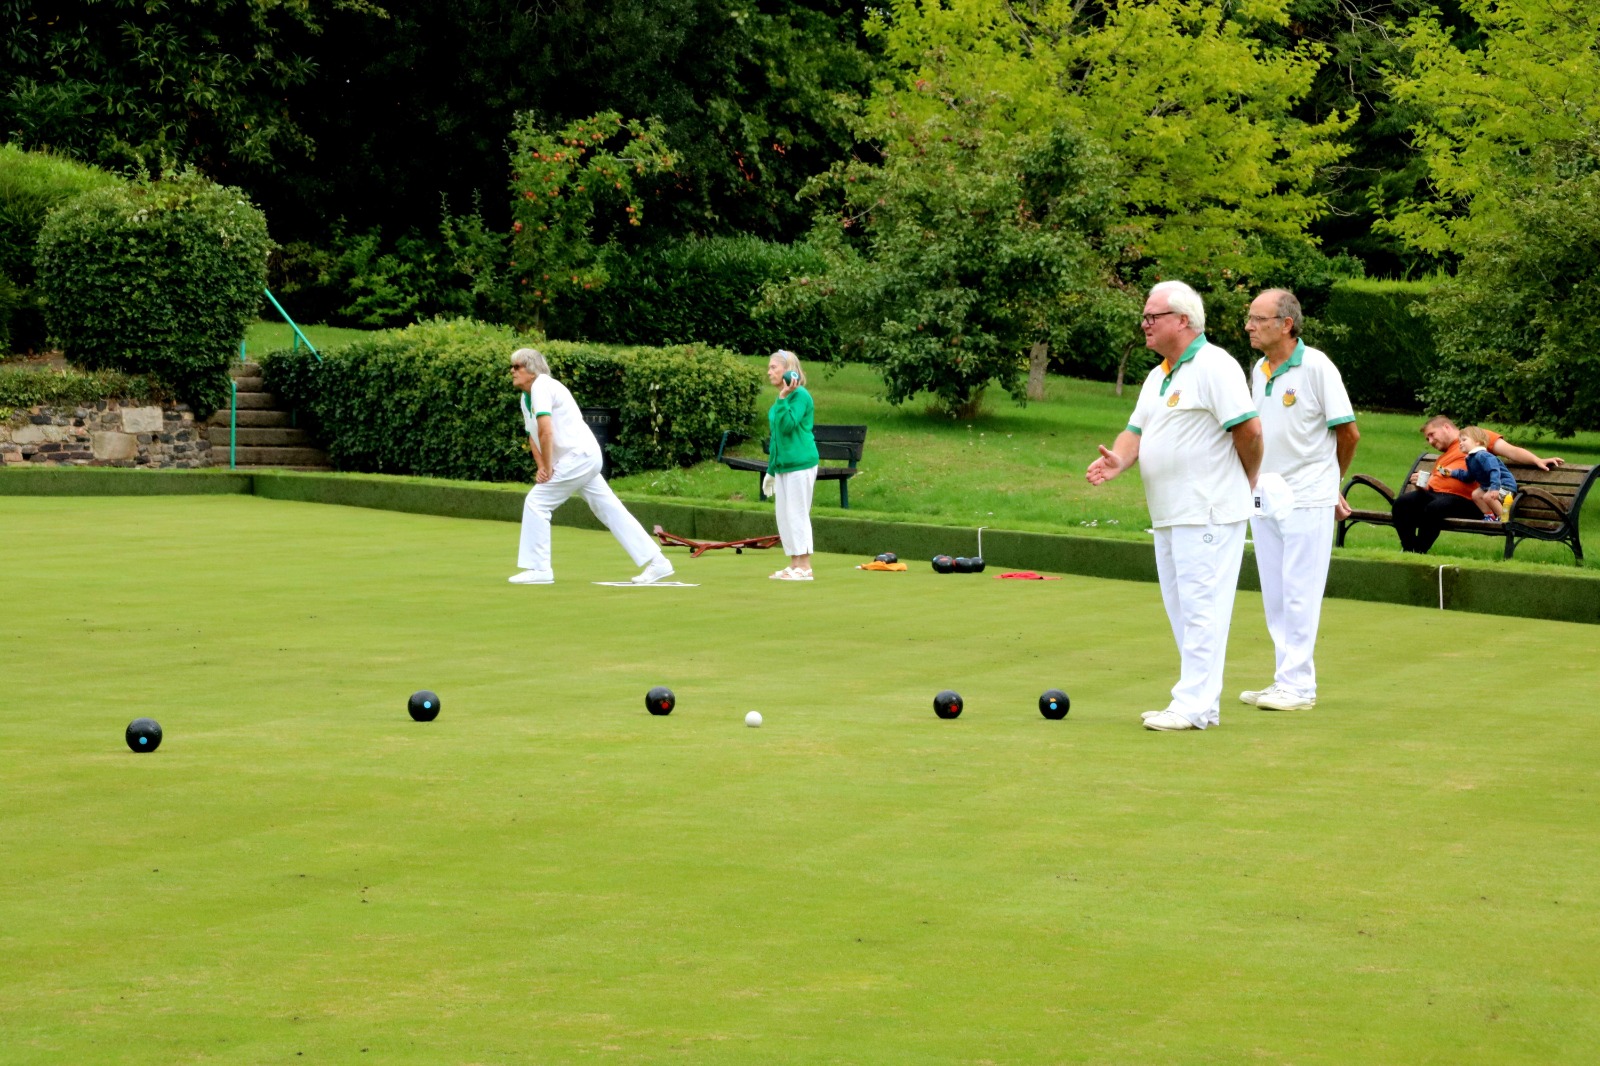 Green is the New Black: Discover the Benefits of Lawn Bowls at Rickmansworth Bowls Club